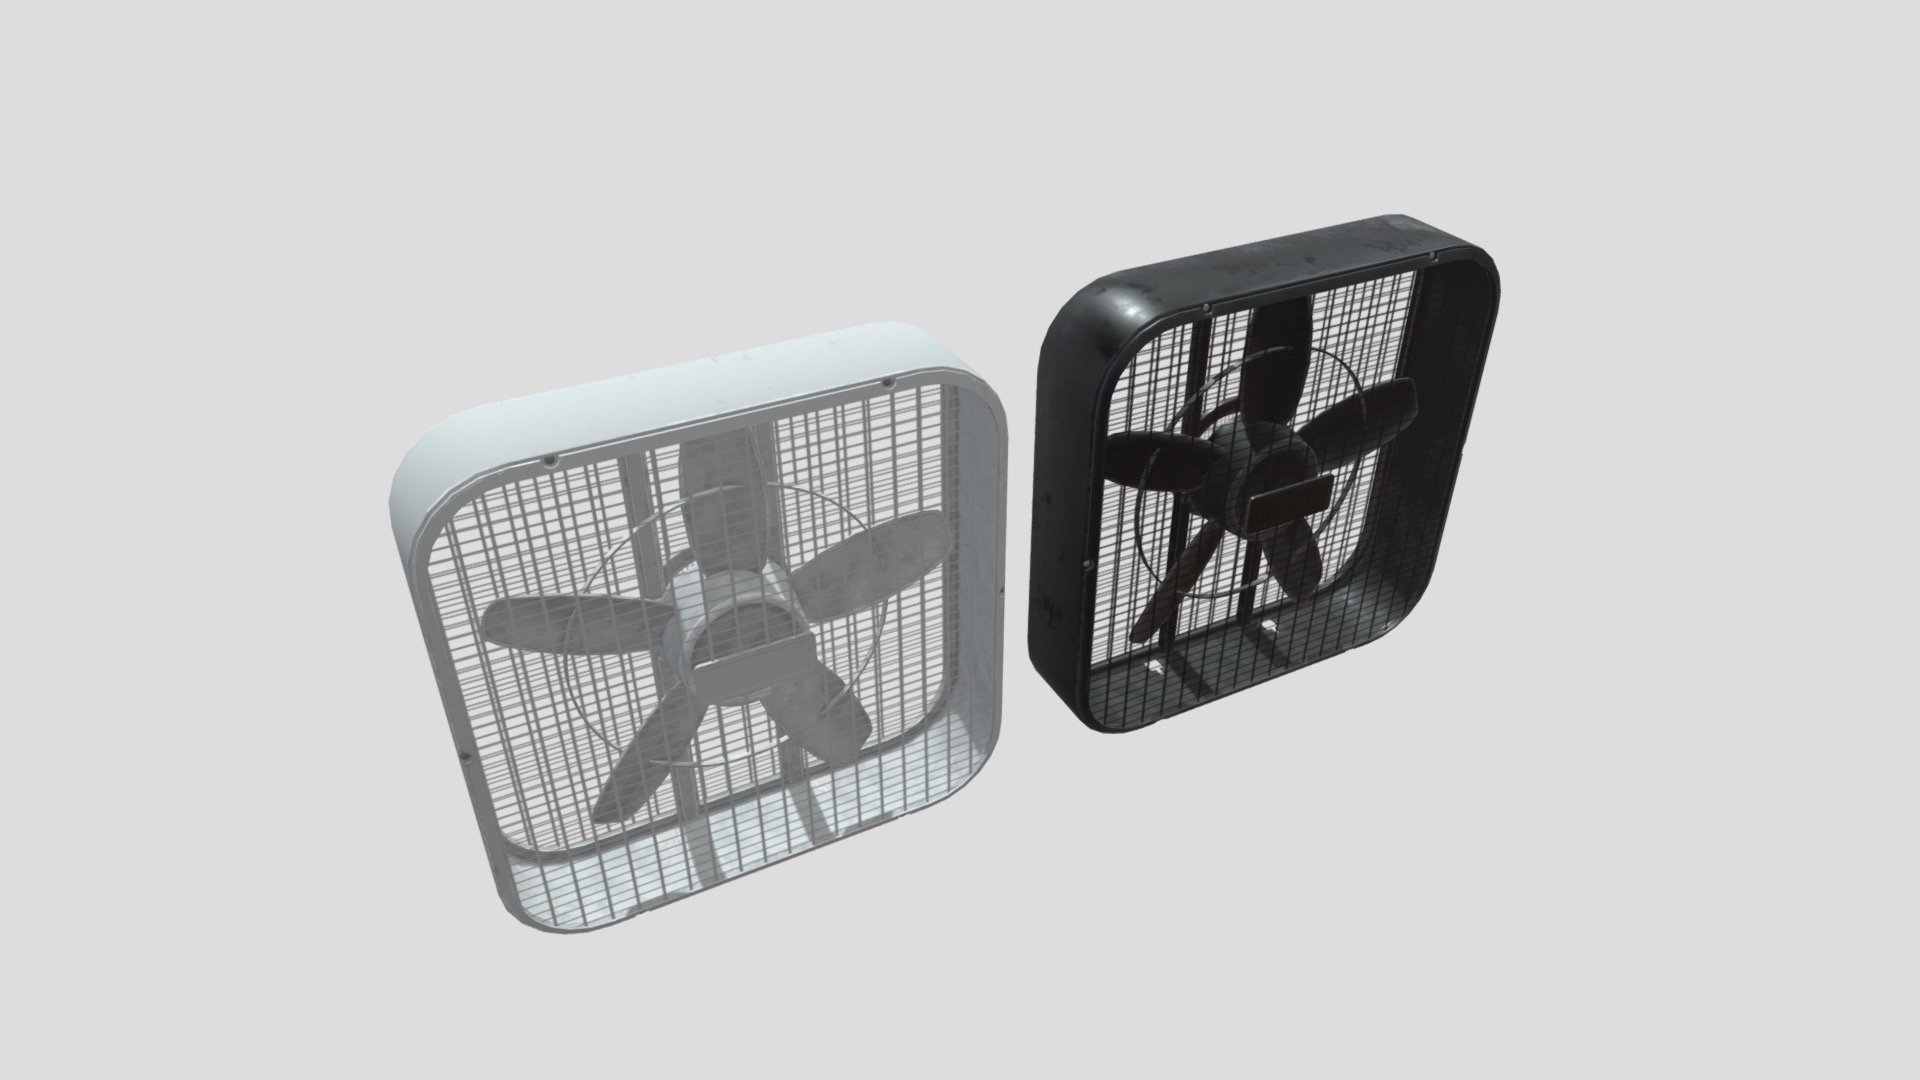 This Box Fan is perfect for decorating any scene, whether its industrial, commercial, or residential. The fan can be easily animated by rotating the fan mesh. The mesh is viewable from all angles and distances.

This Includes:

The mesh
4K and 2K Texture Sets (Albedo, Alpha, Metallic, Roughness, Normal, Height)
2 Color Variations (Black, White)
The mesh is UV Unwrapped with vertex colors and can easily be retextured - Box Fan with 4K and 2K Textures - Buy Royalty Free 3D model by Desertsage 3d model